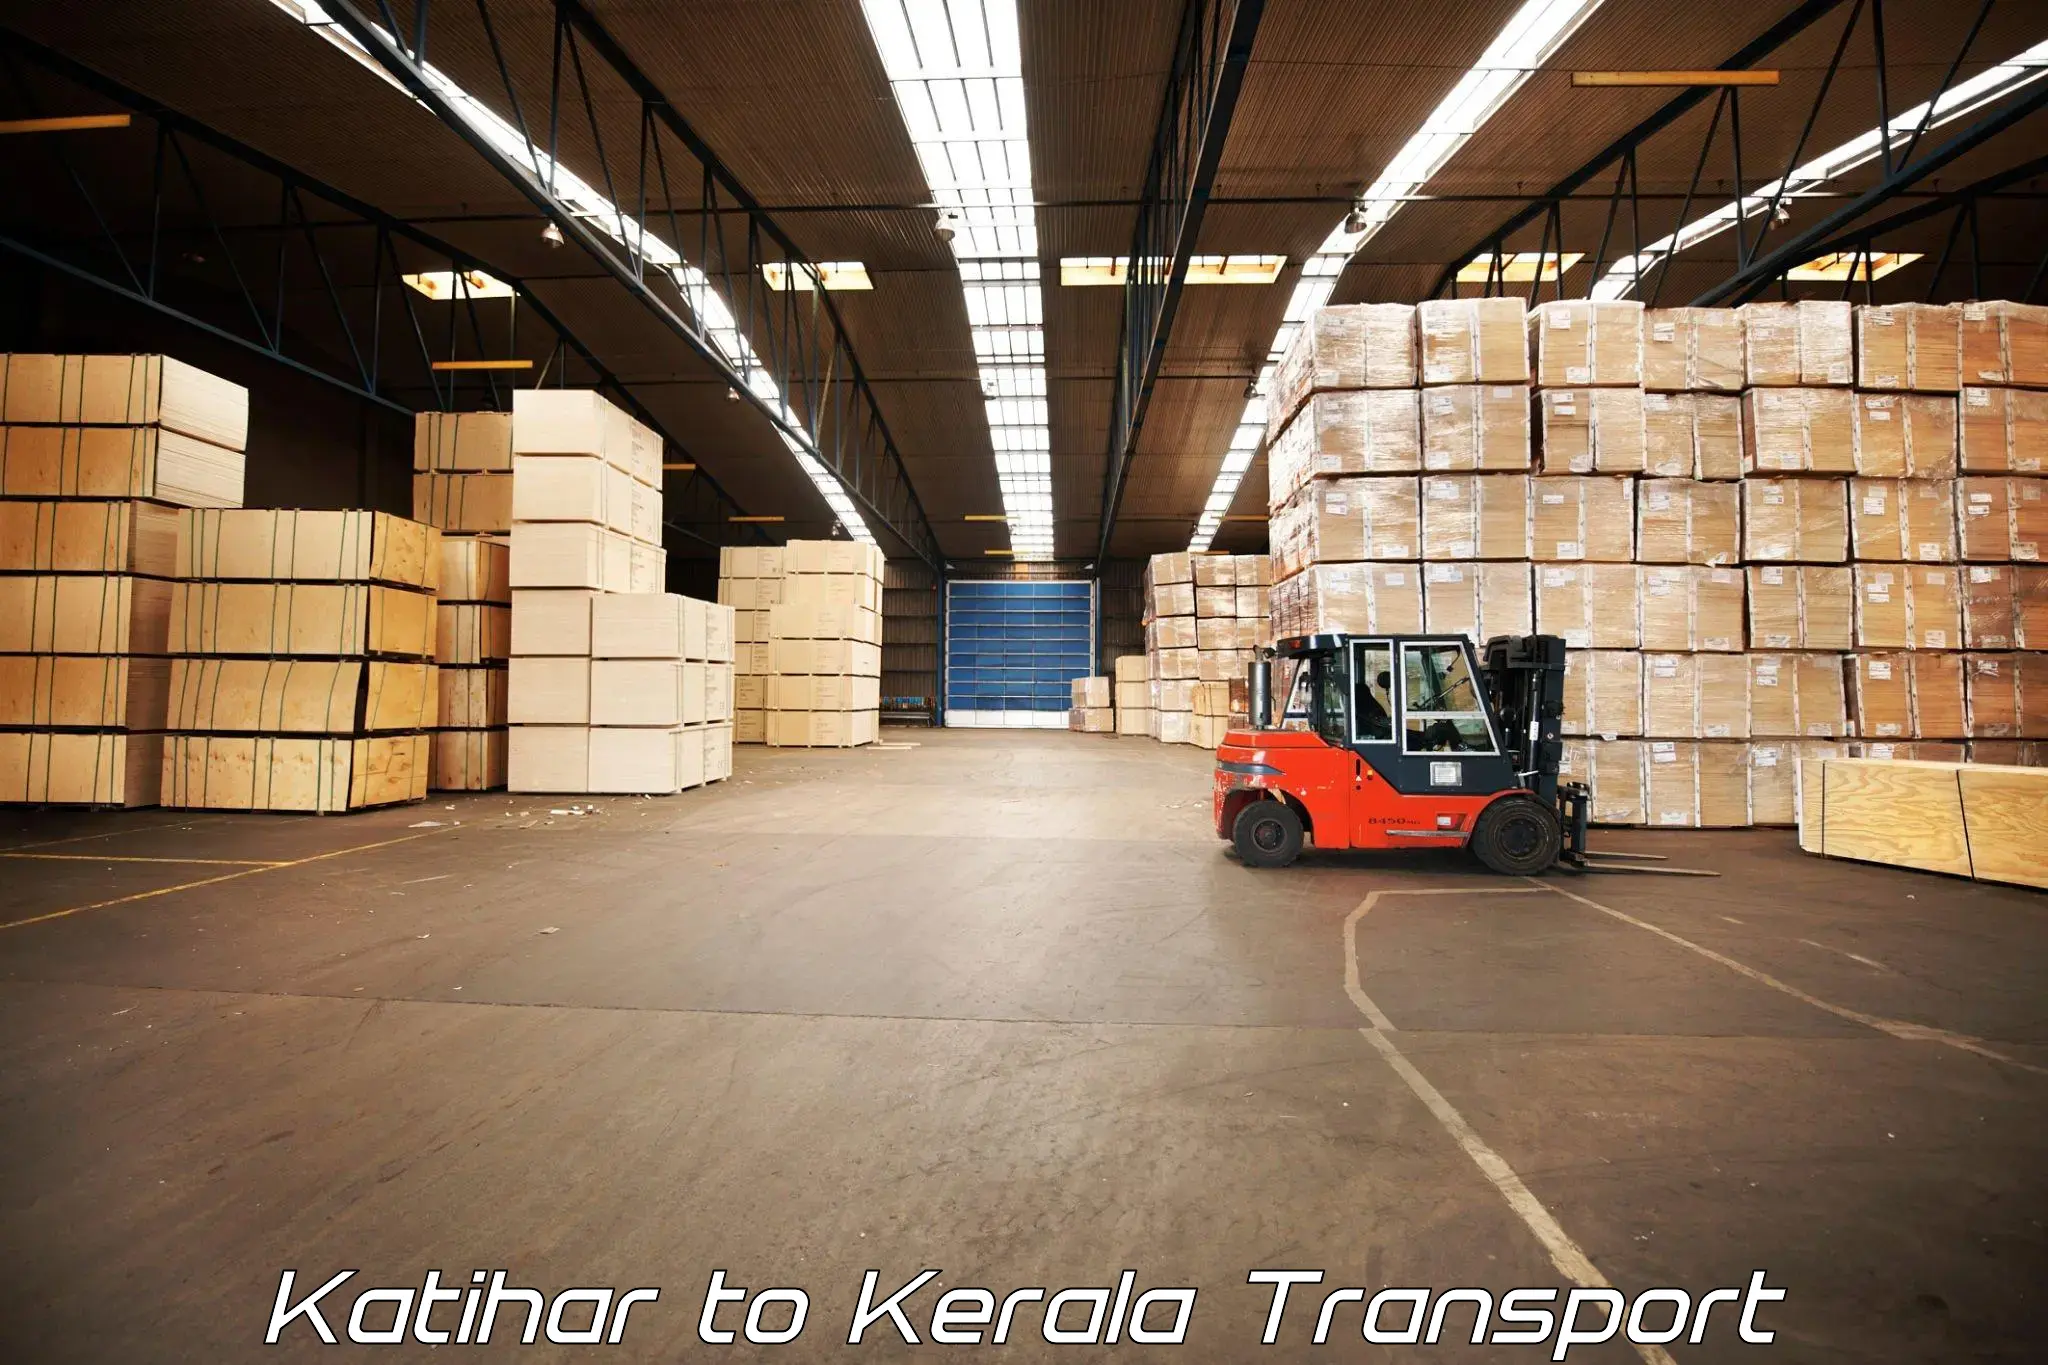 Goods delivery service Katihar to Palakkad